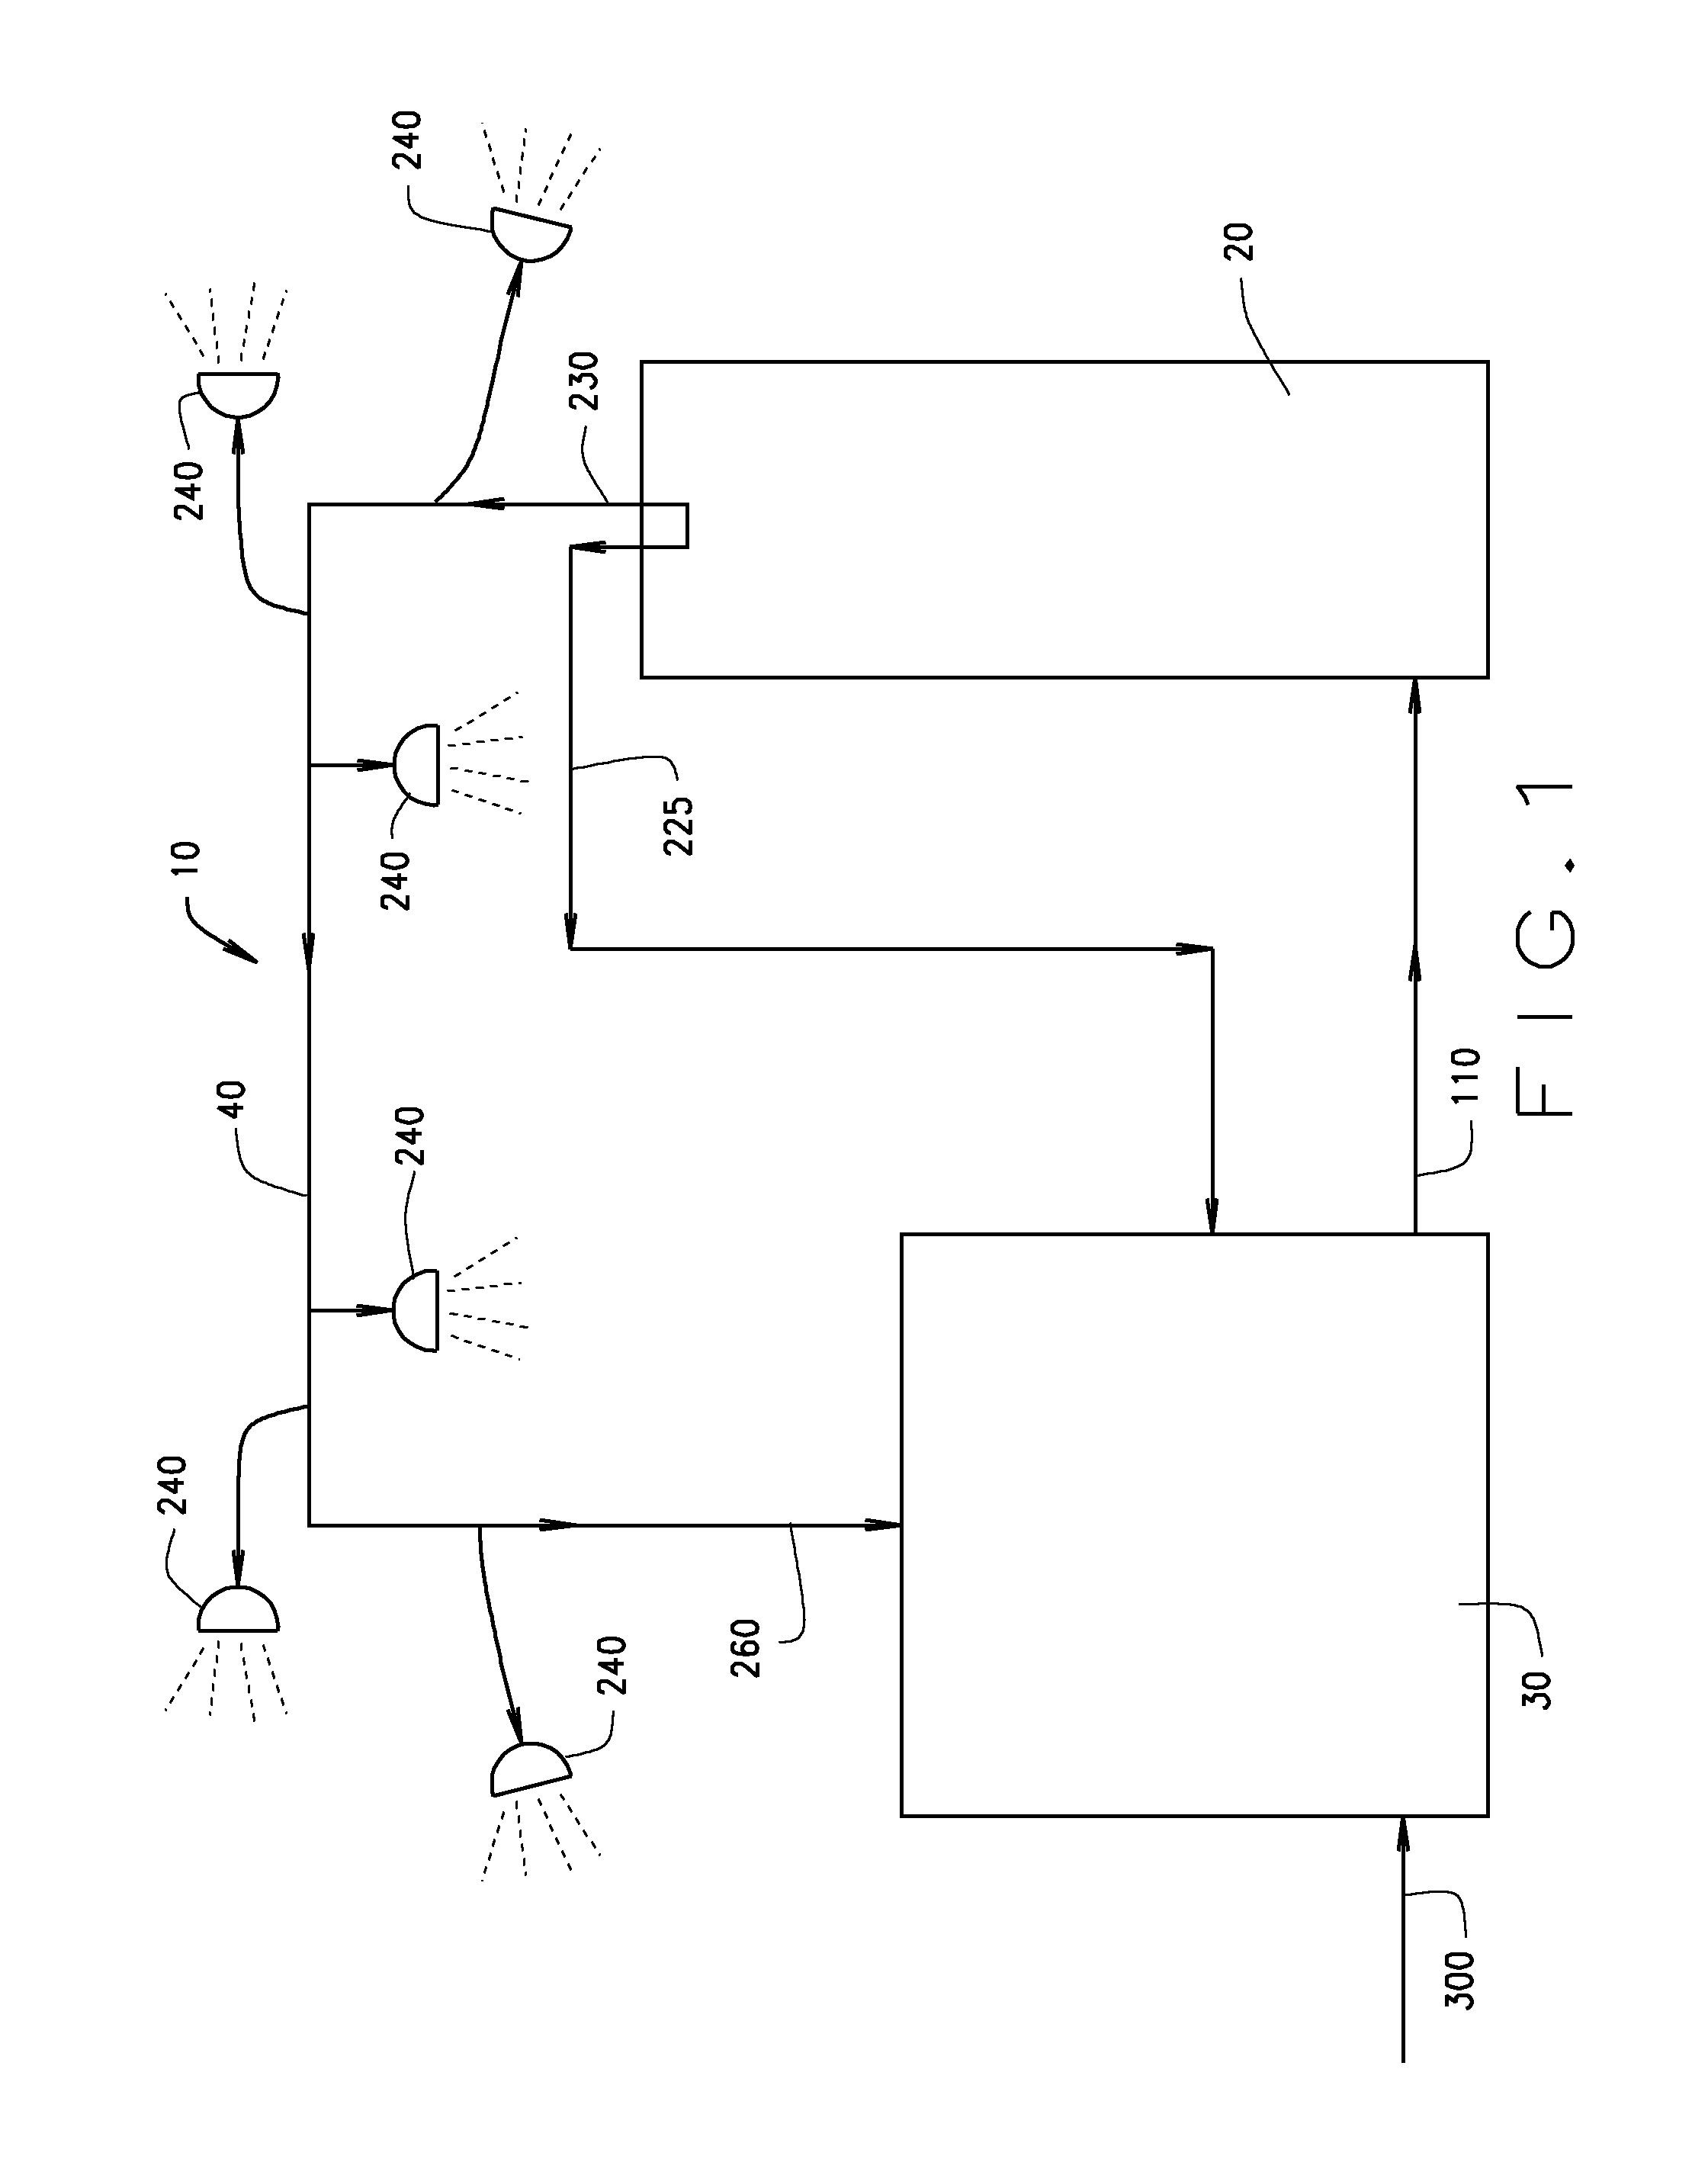 System for producing and distributing an ozonated fluid